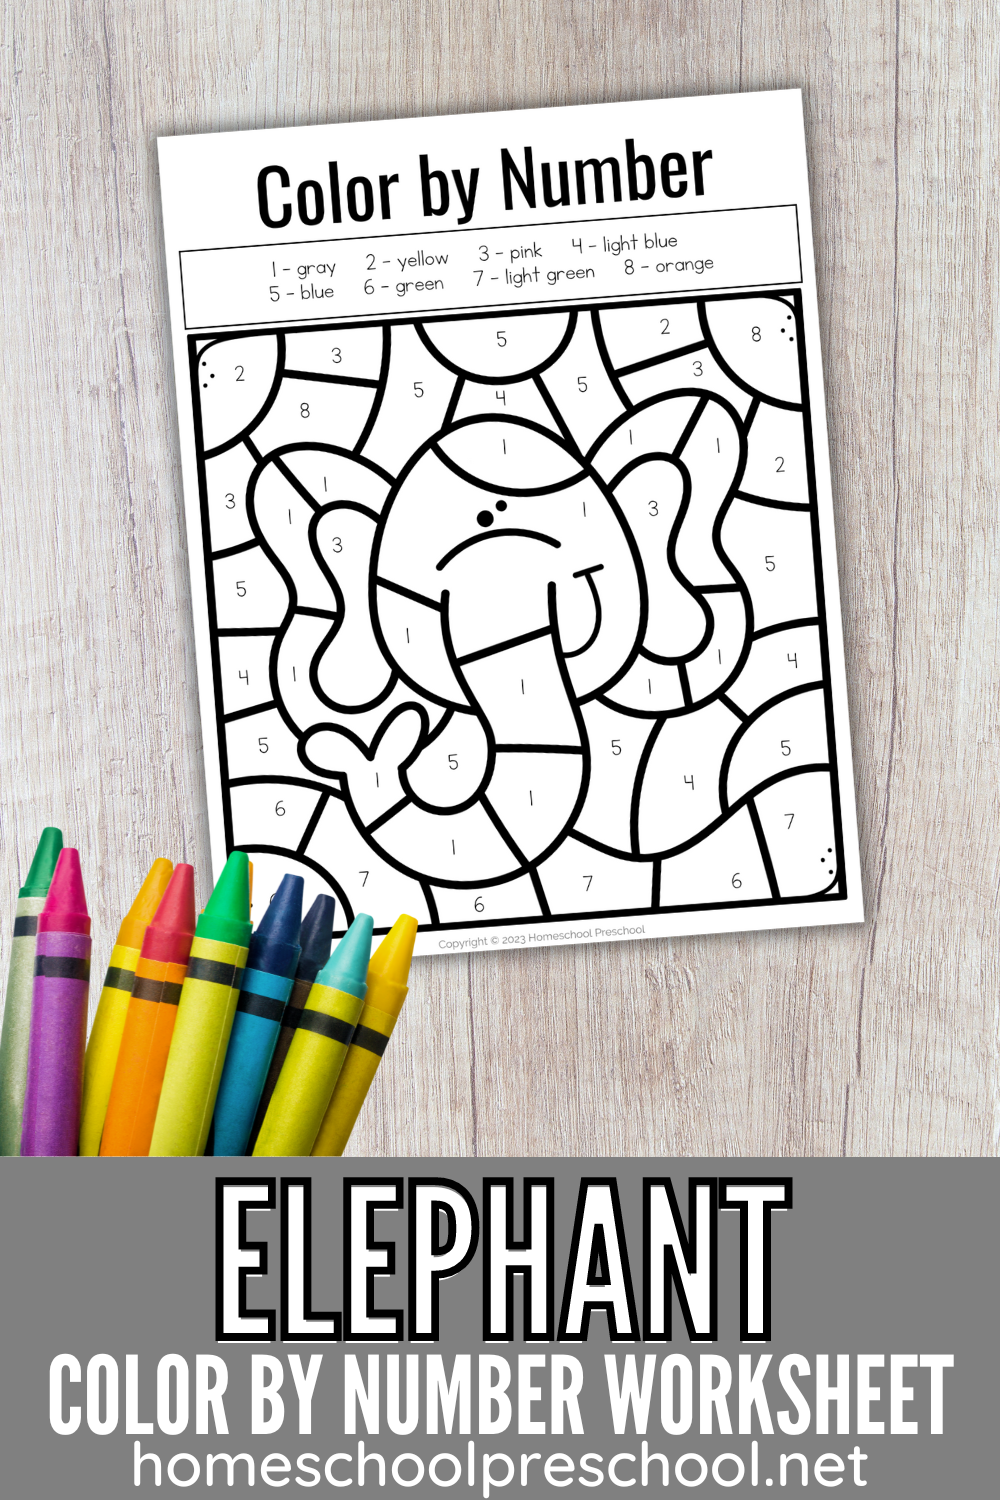 e-is-for-elephant-template Color by Number Elephant